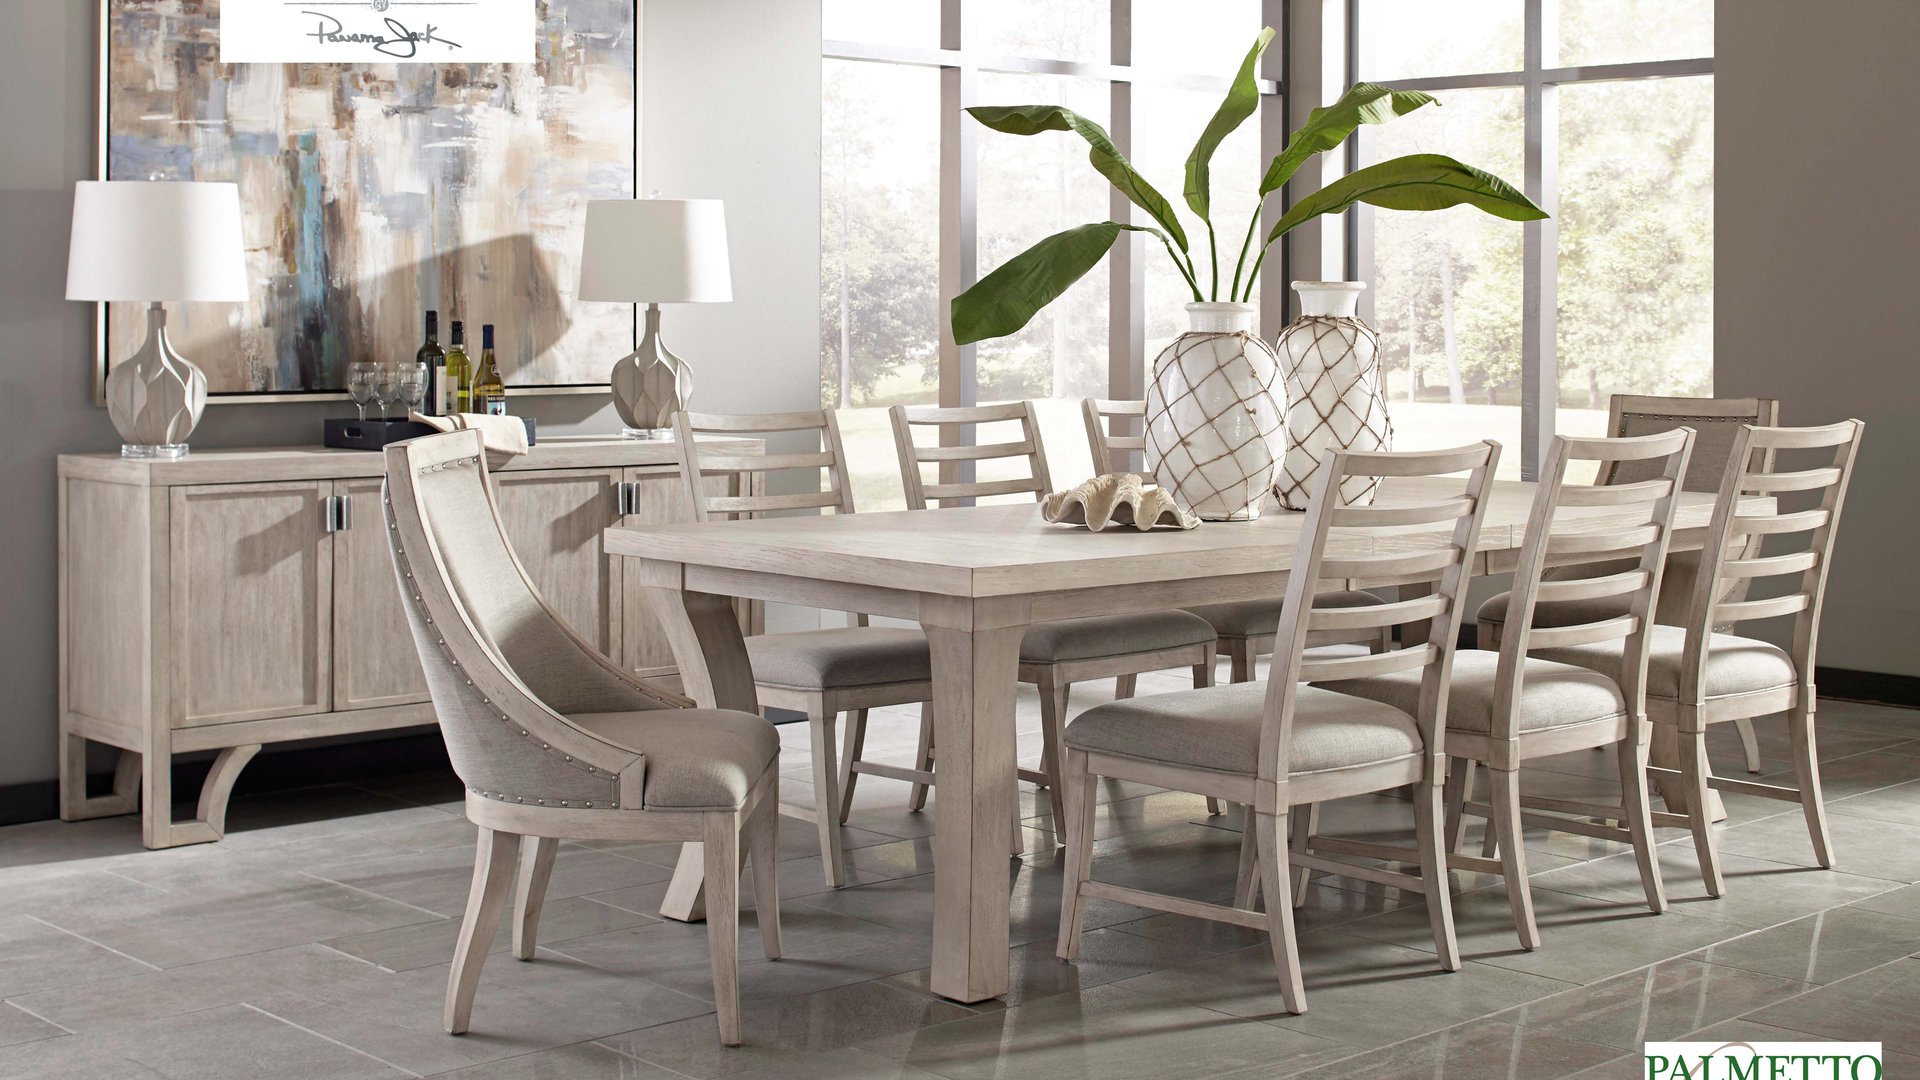 139 Graphite Dining Room      -653-631S-632S -679 with logo.jpg